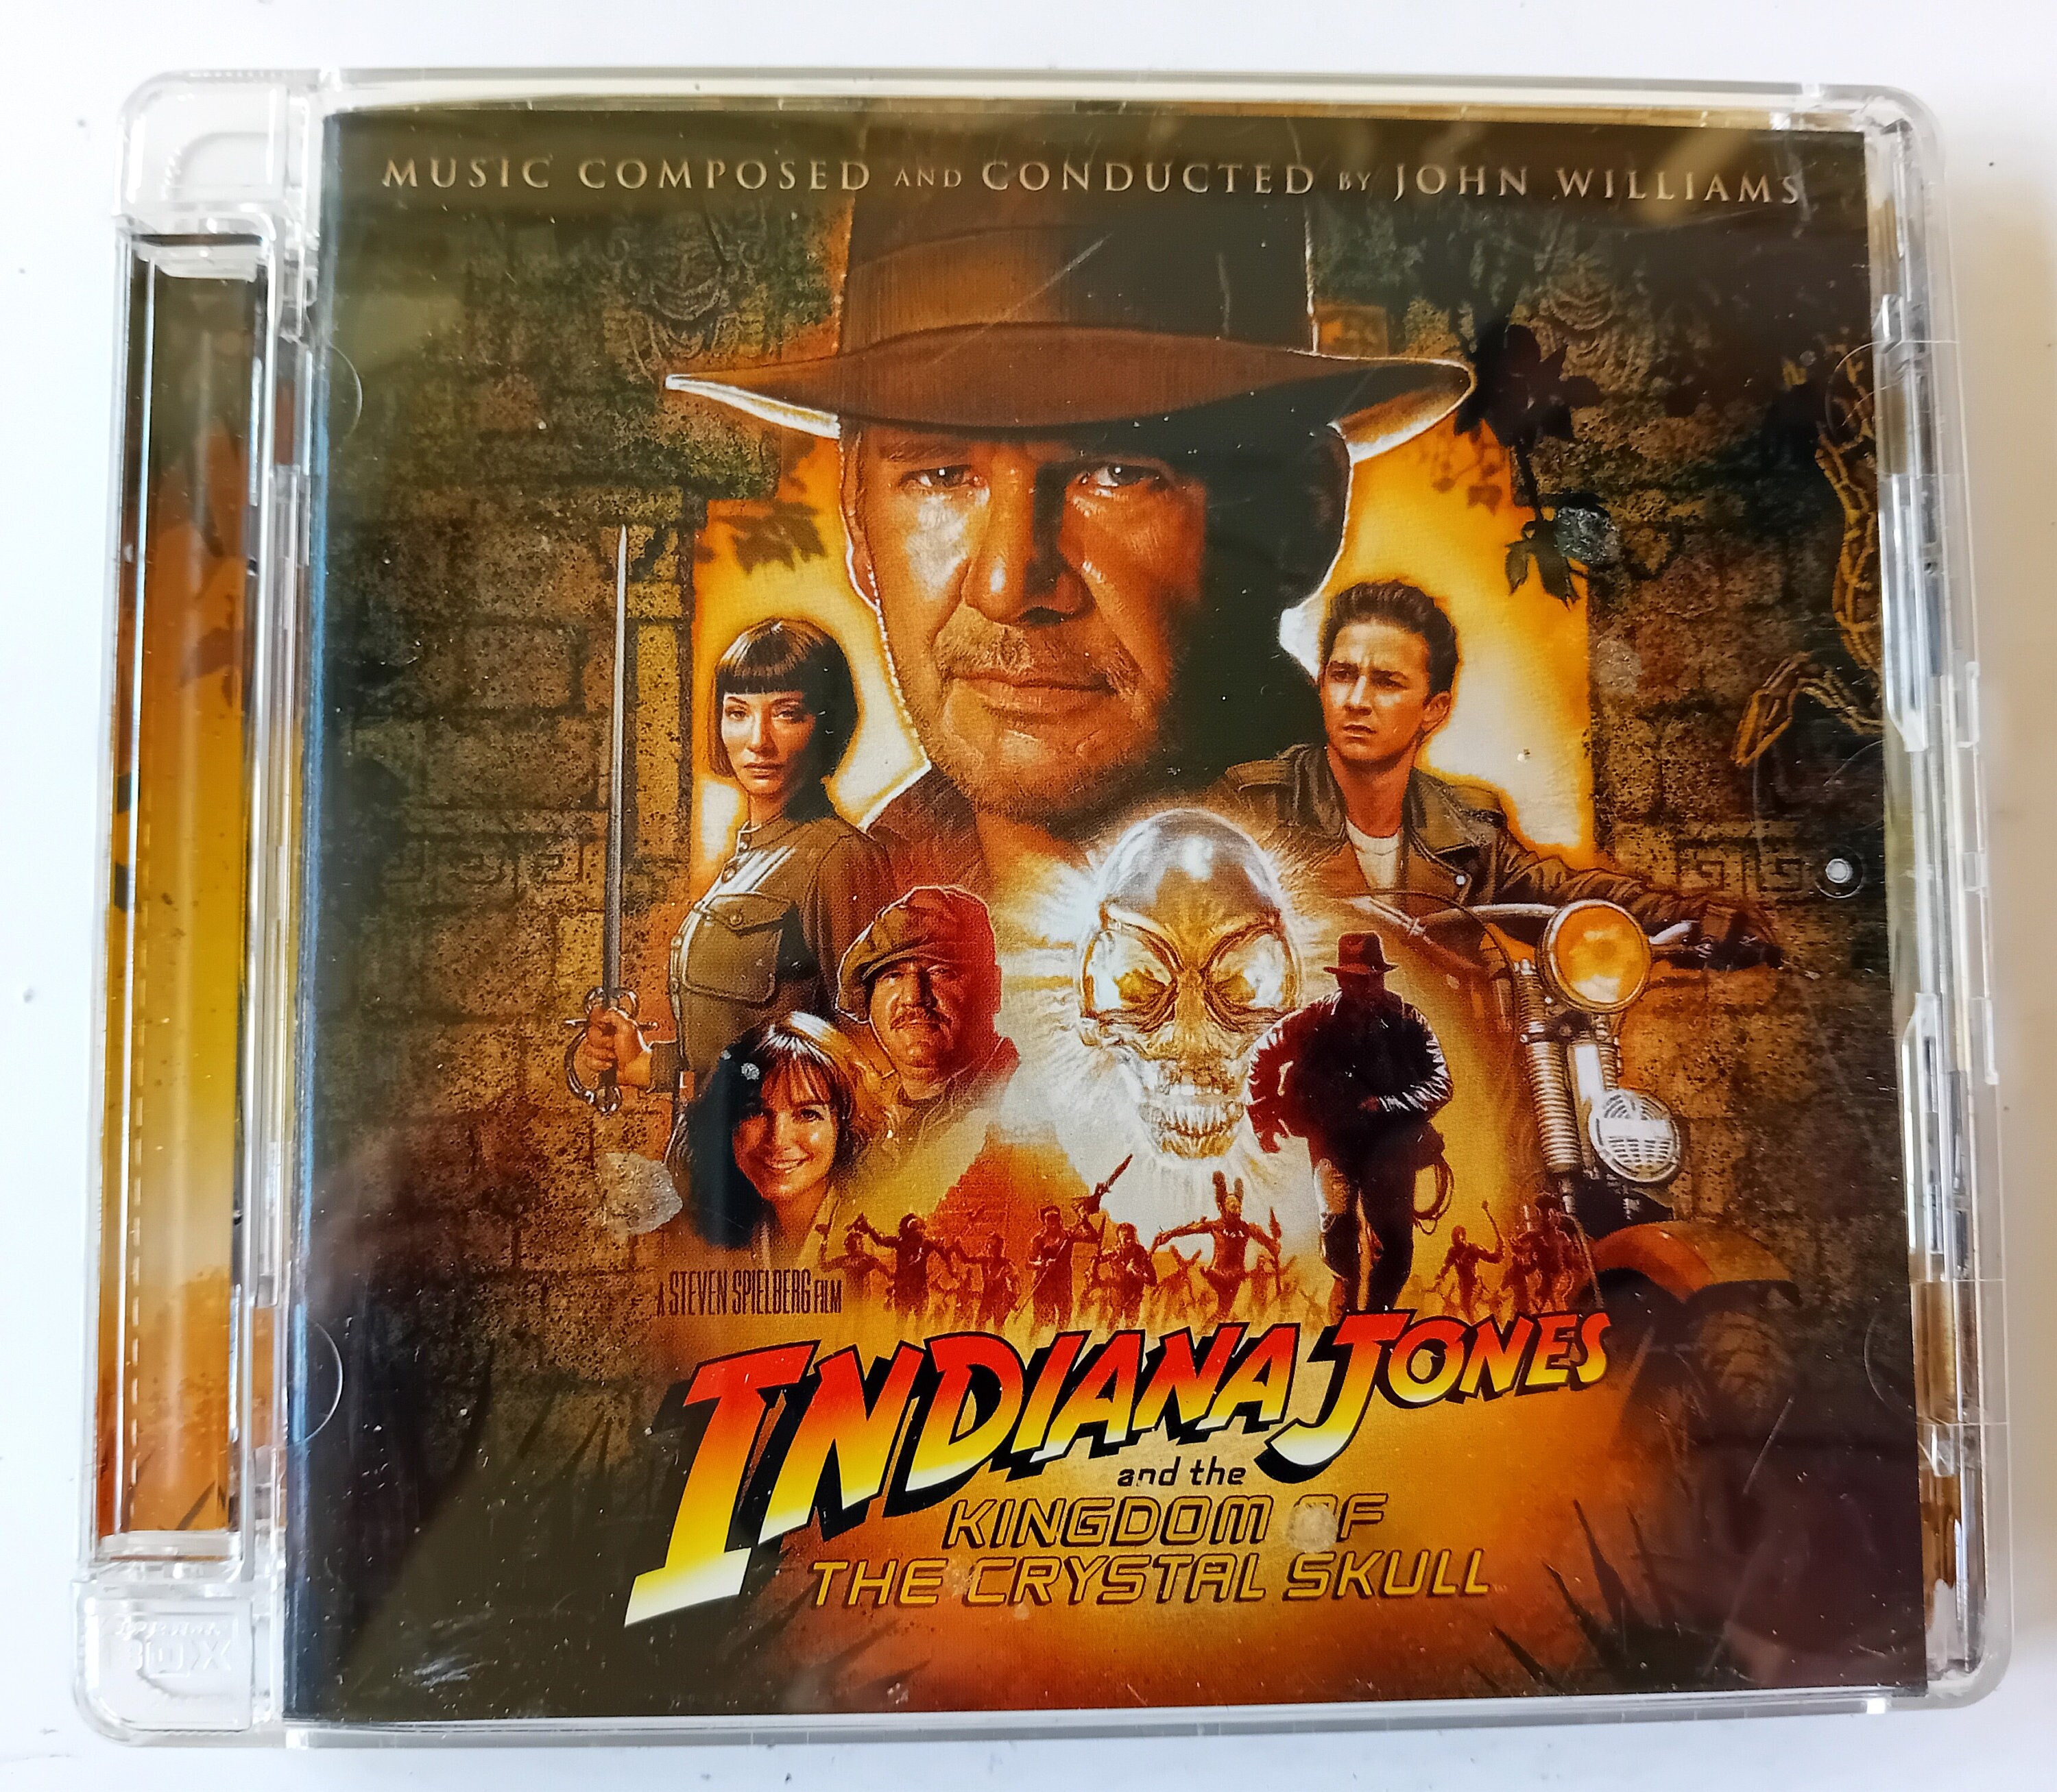 Thoughts on Indiana Jones and the Kingdom of the Crystal Skull (2008)? : r/ indianajones